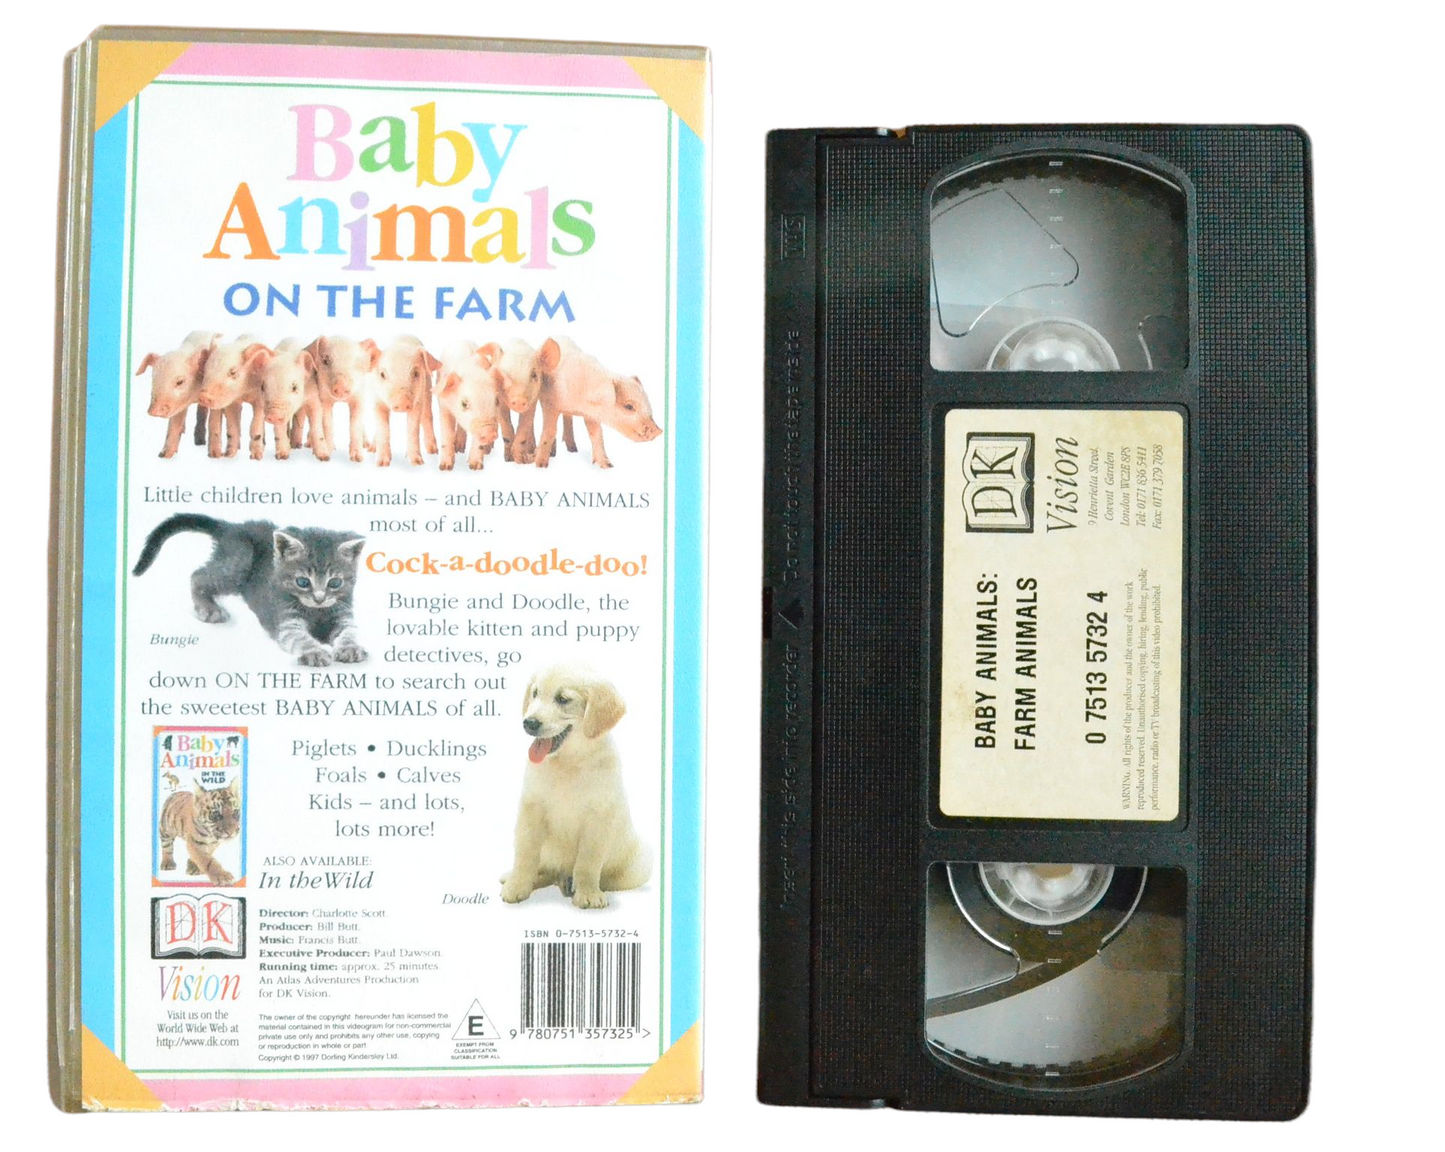 Baby Animals On The Farm (Cock-a-doodle-doo!) - DK Vision - Children - Pal VHS-